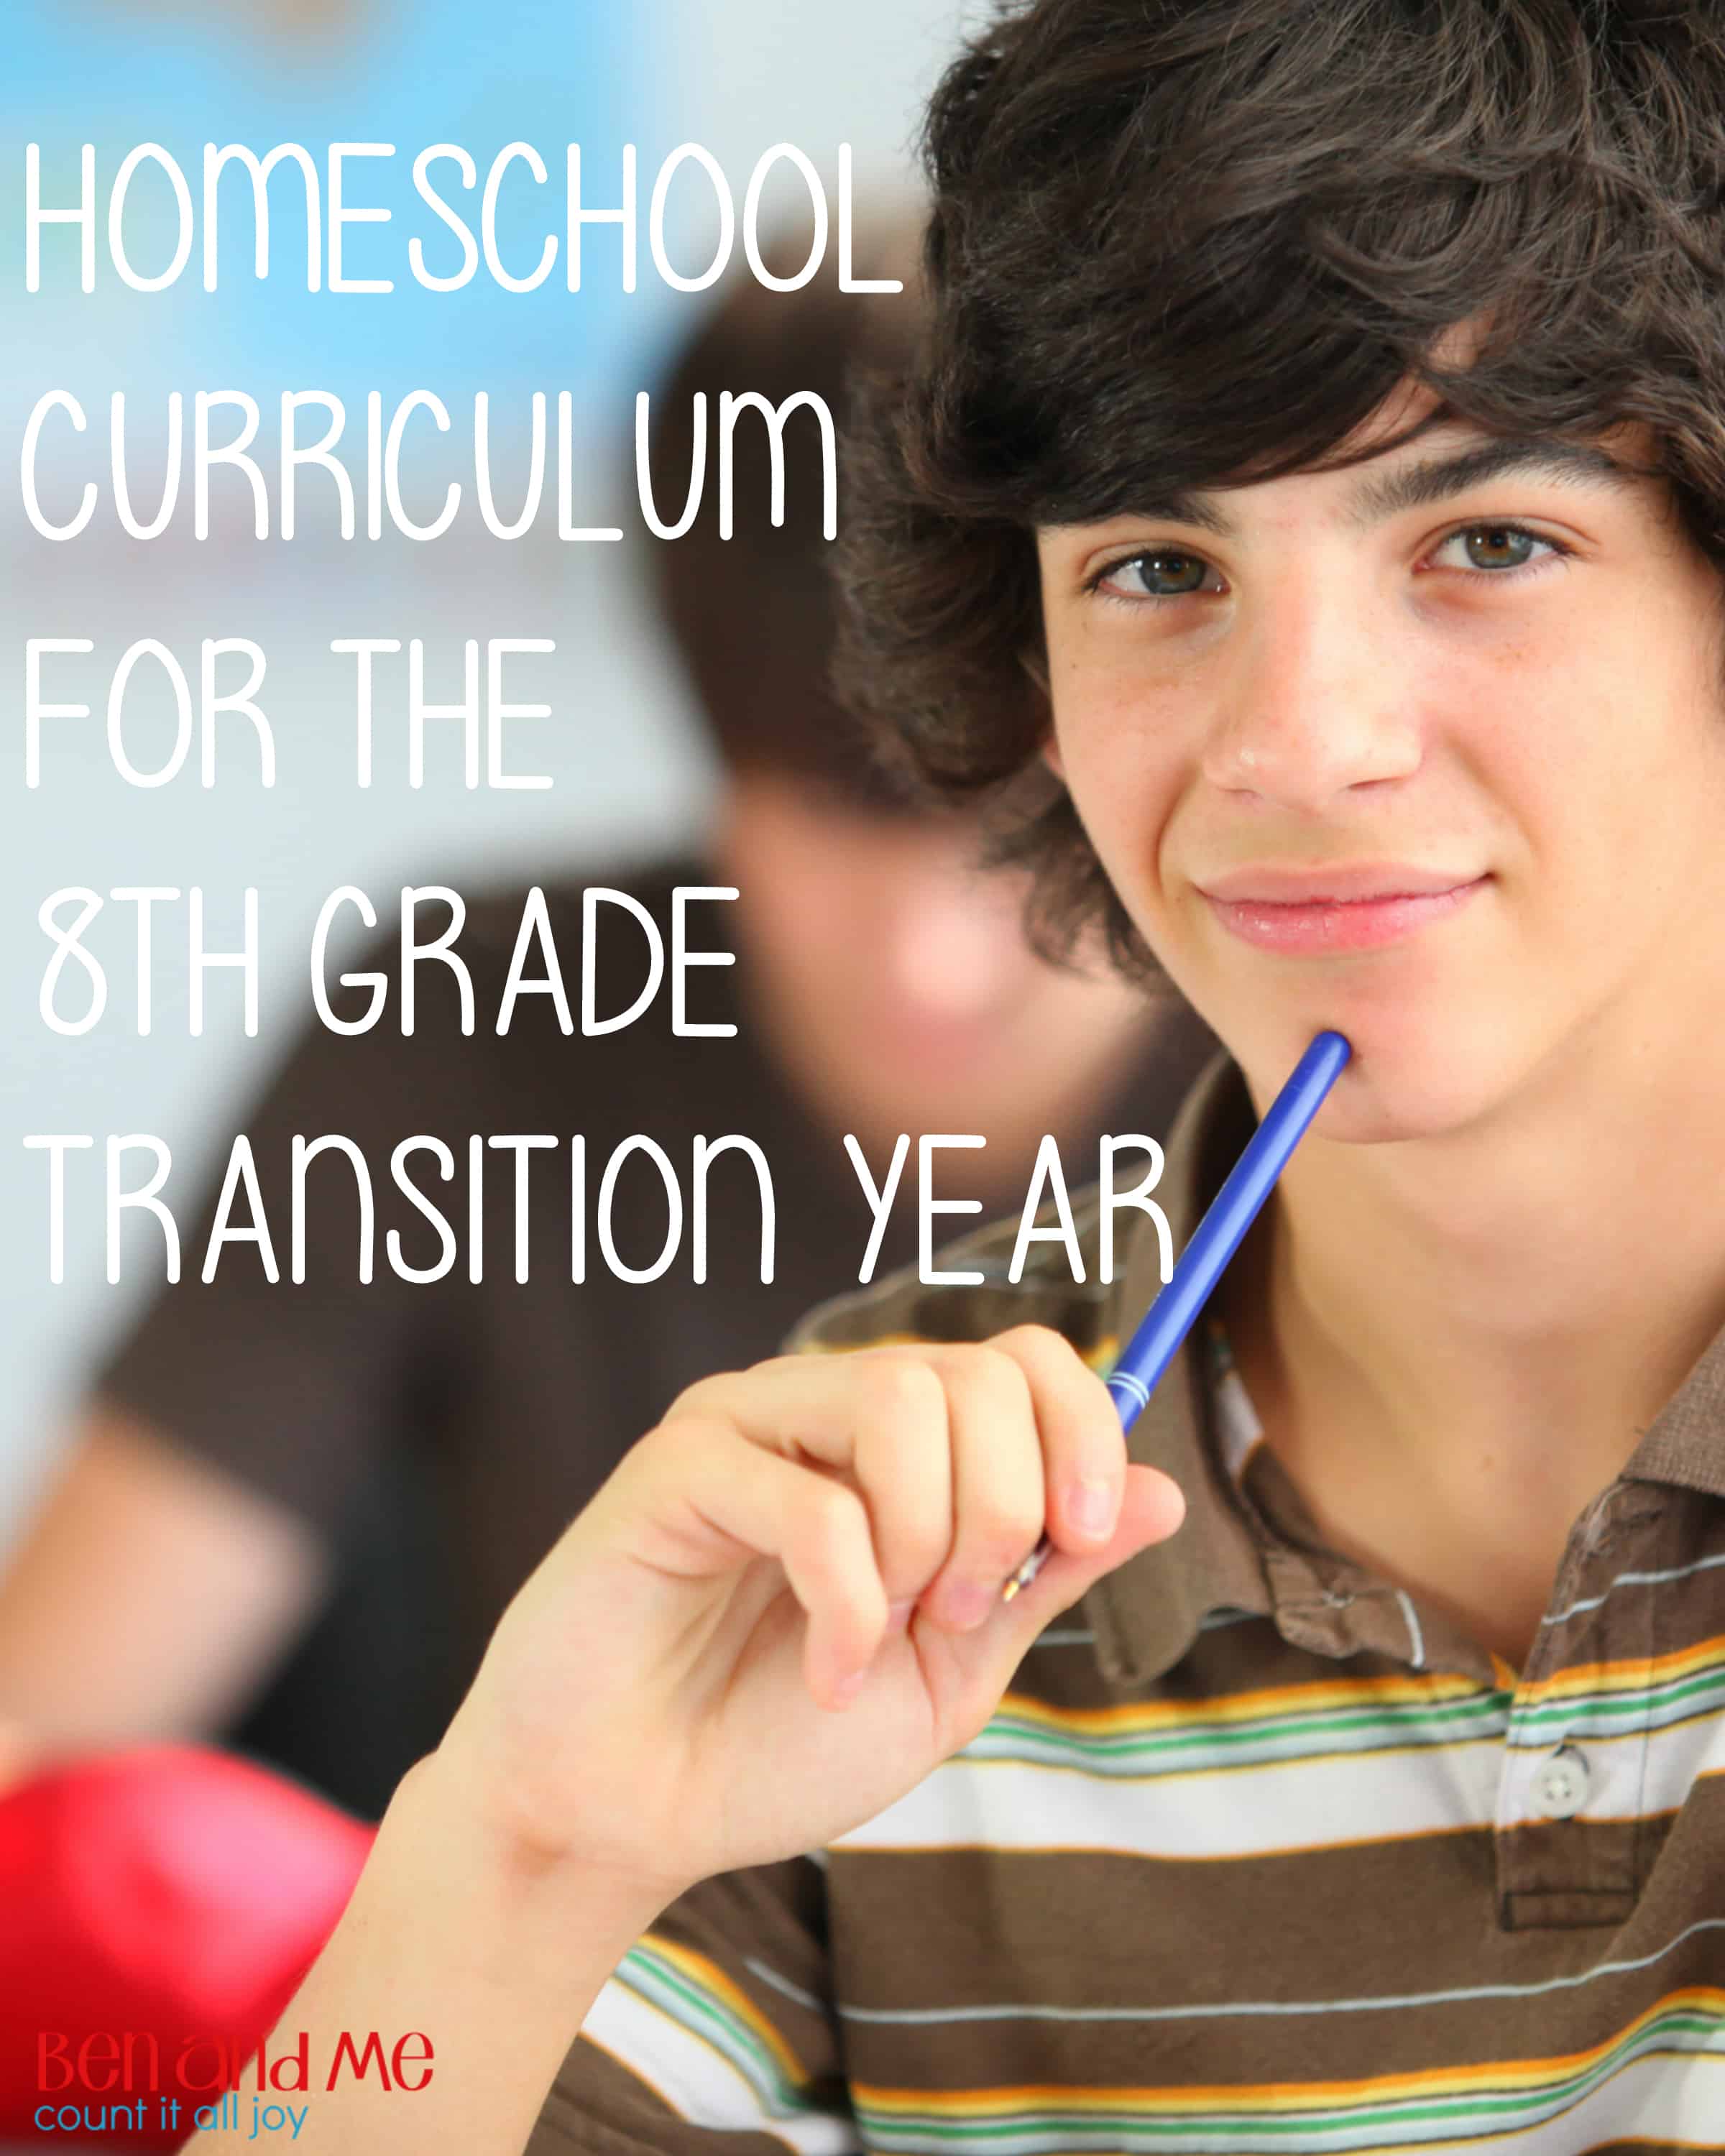 Homeschool Curriculum for the 8th Grade Curriculum Year